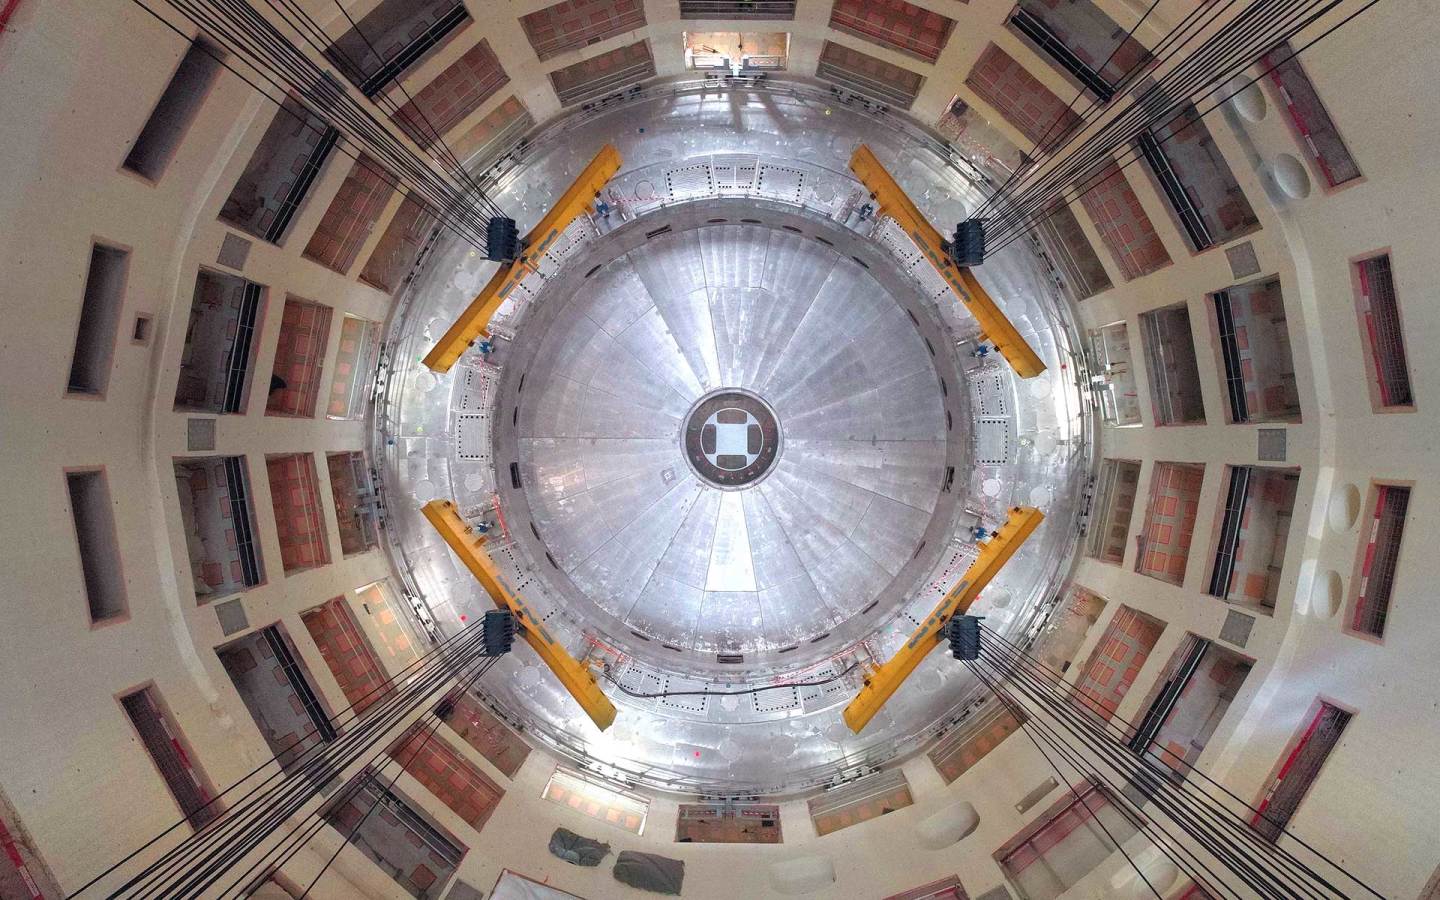 A look inside the pit of the ITER tokamak reactor